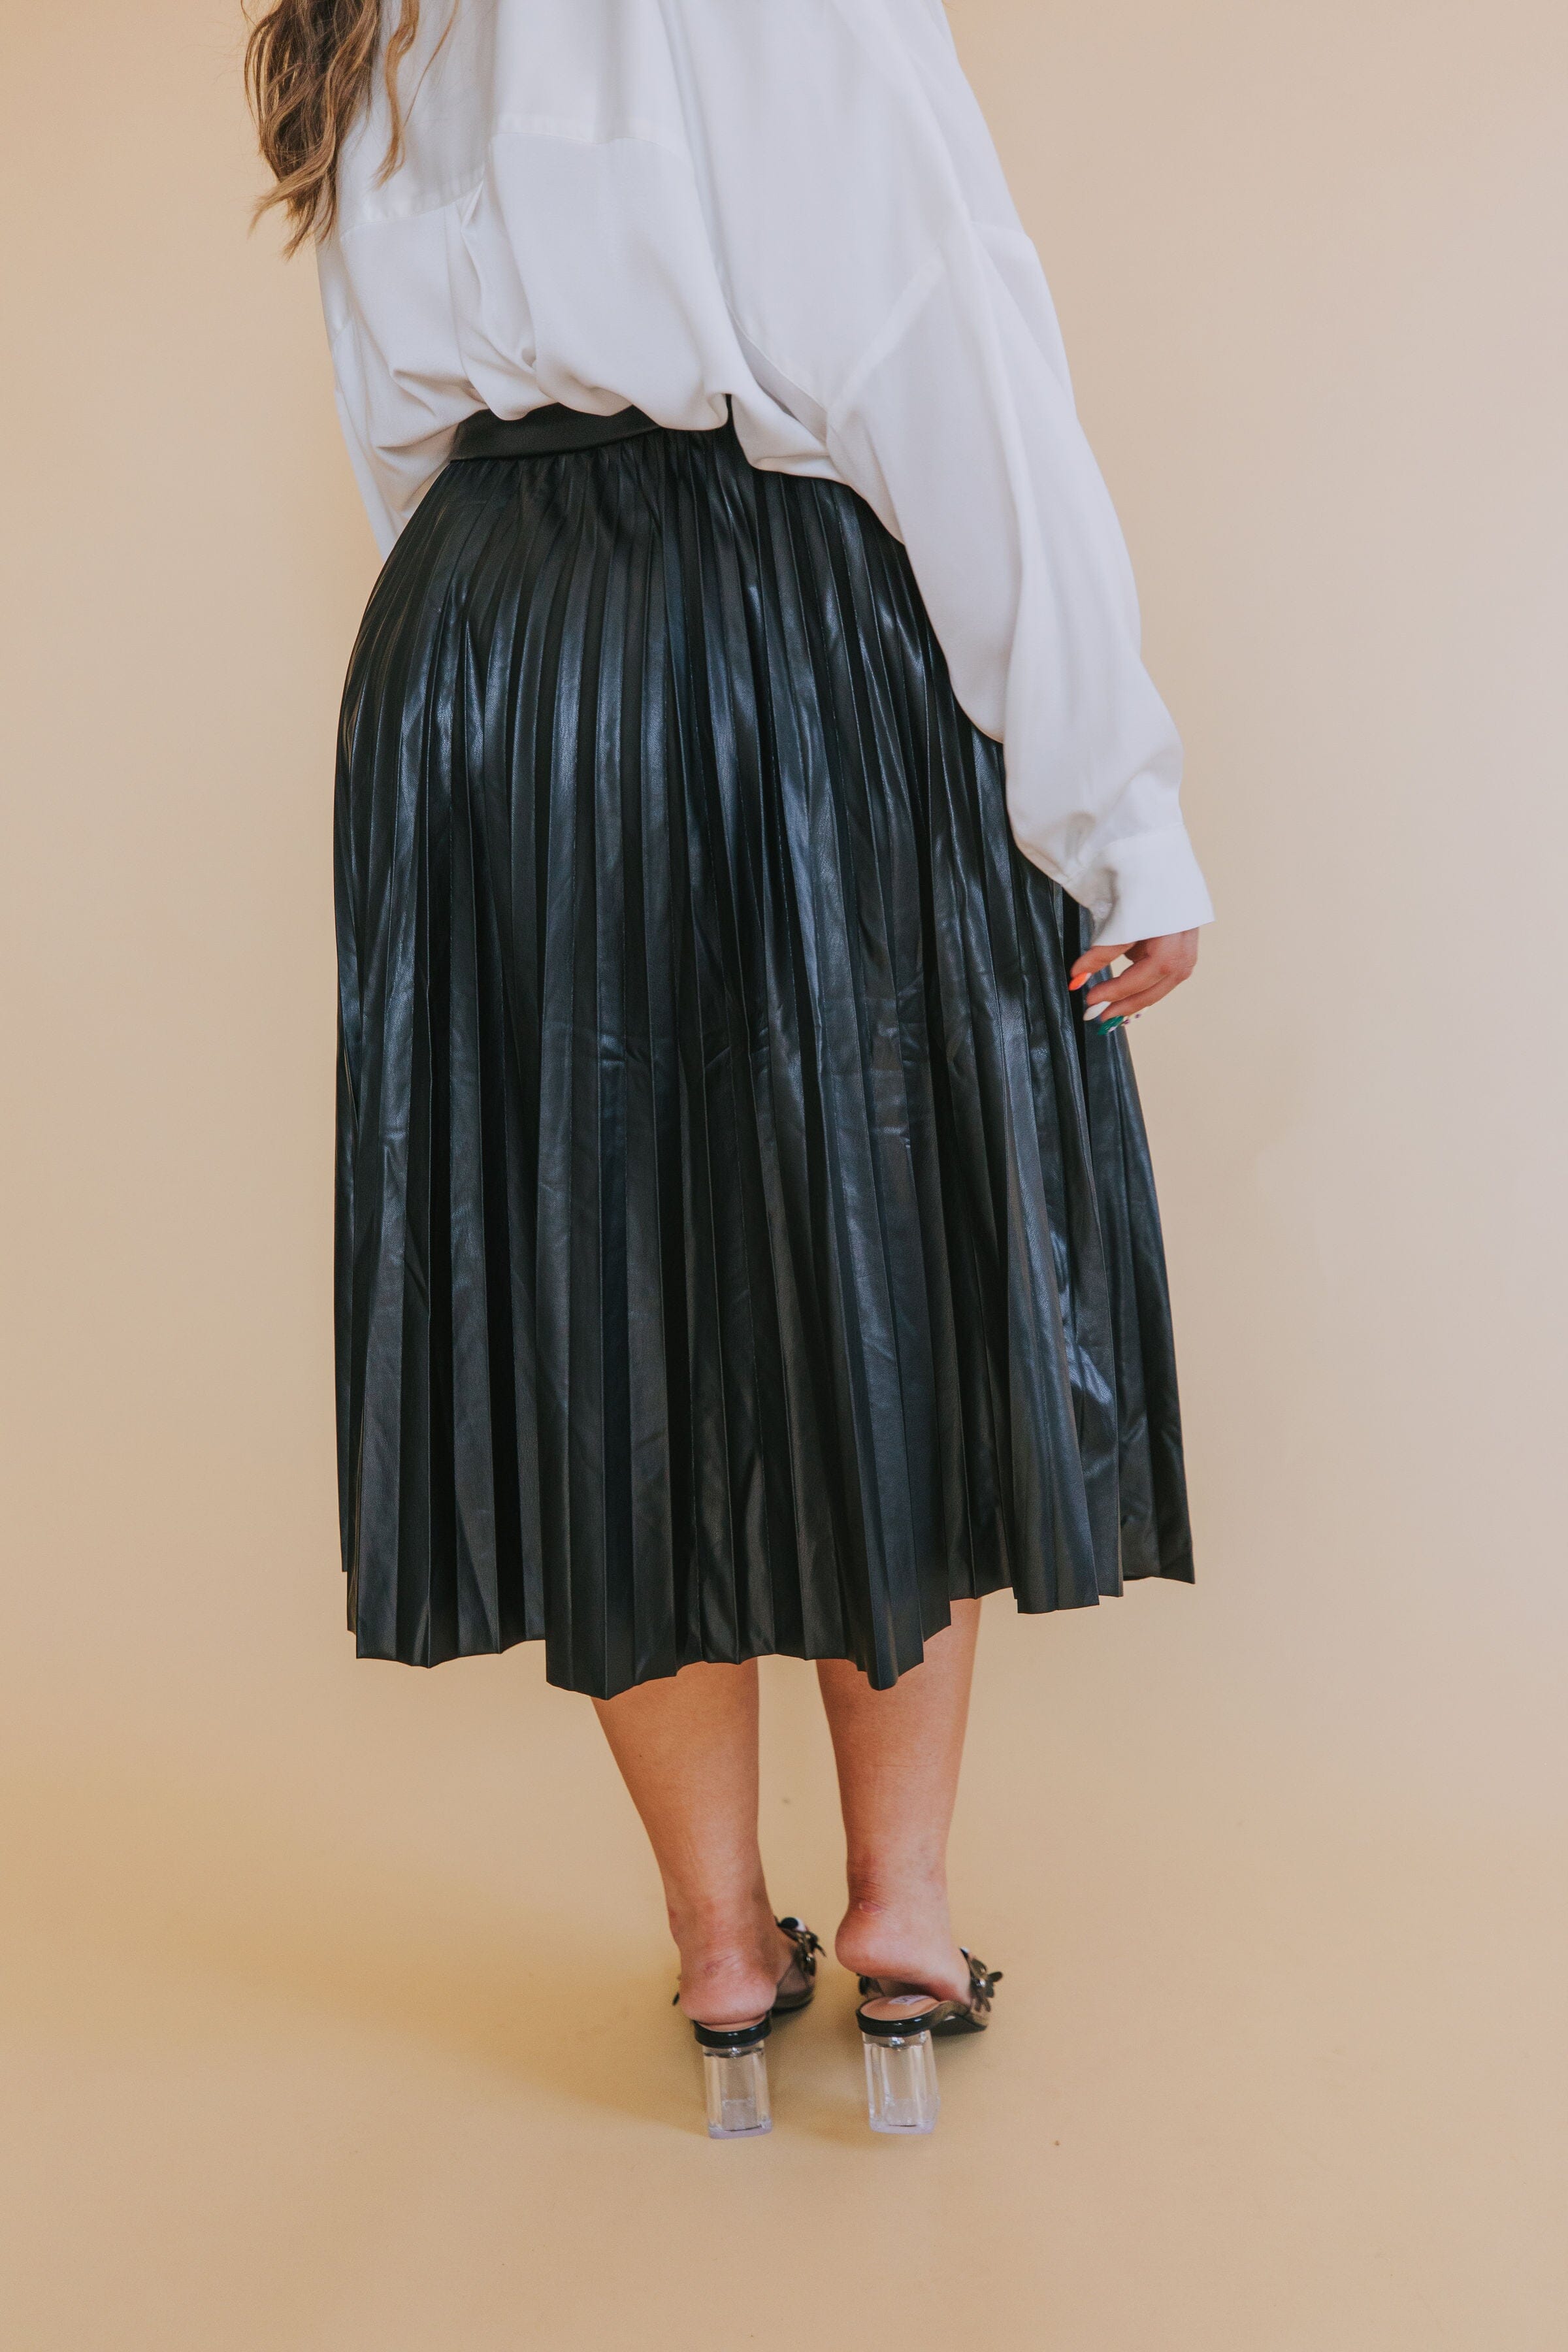 PLUS SIZE - Keep Coming Back Skirt - 2 Colors!